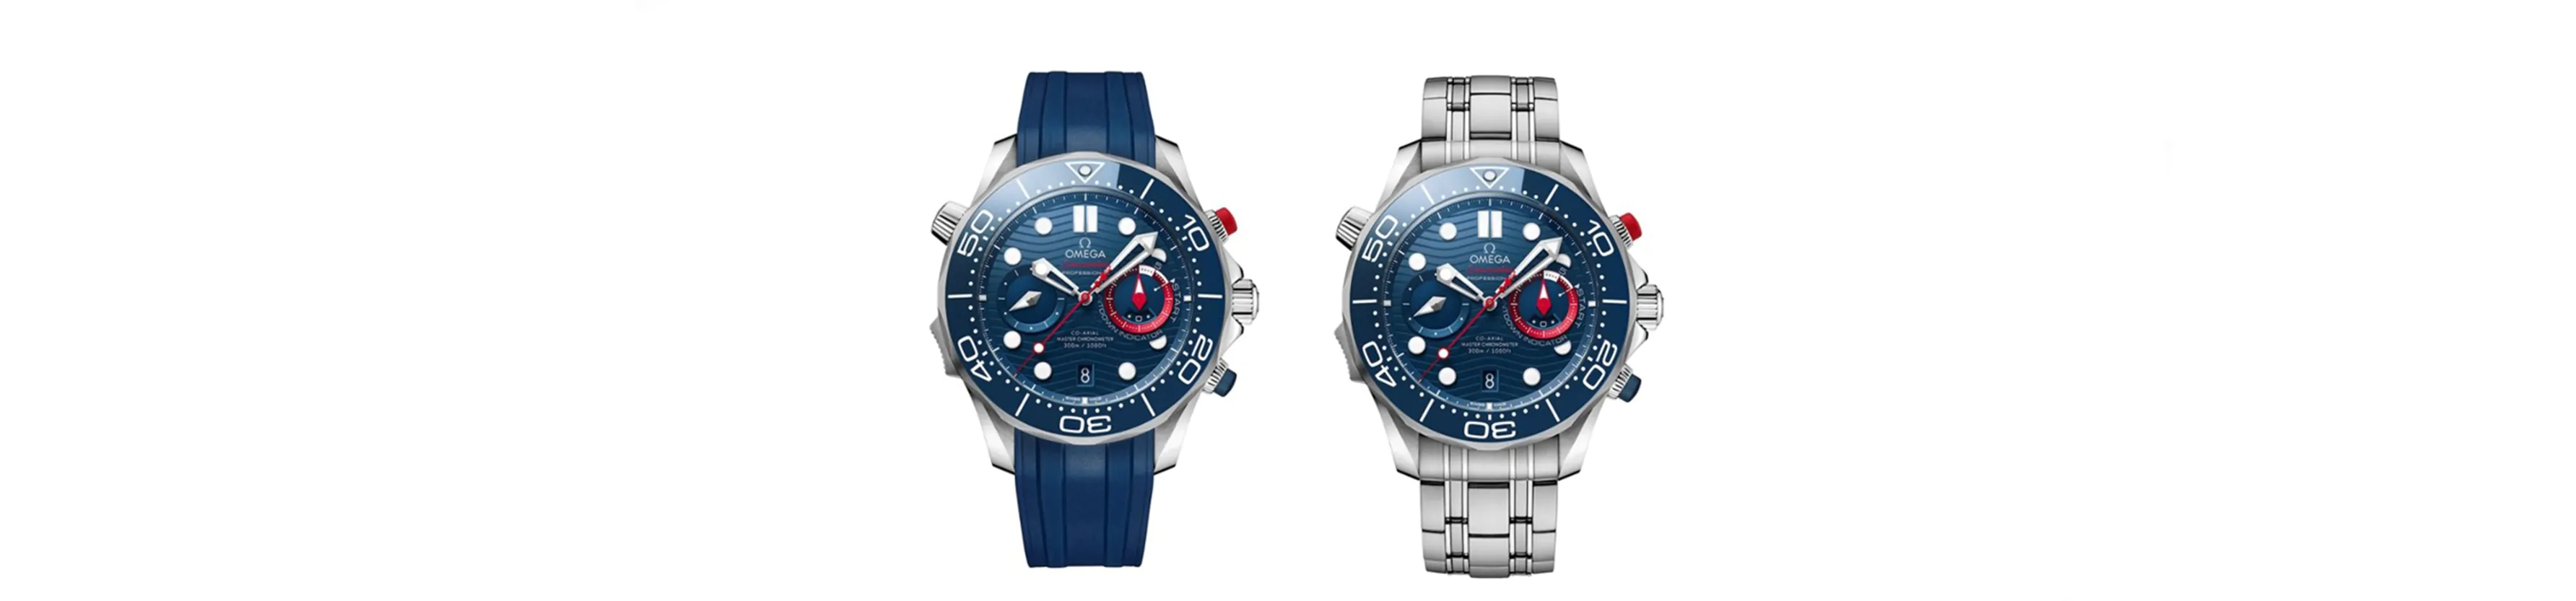 OMEGA Introduce: Chronograph for the Cup